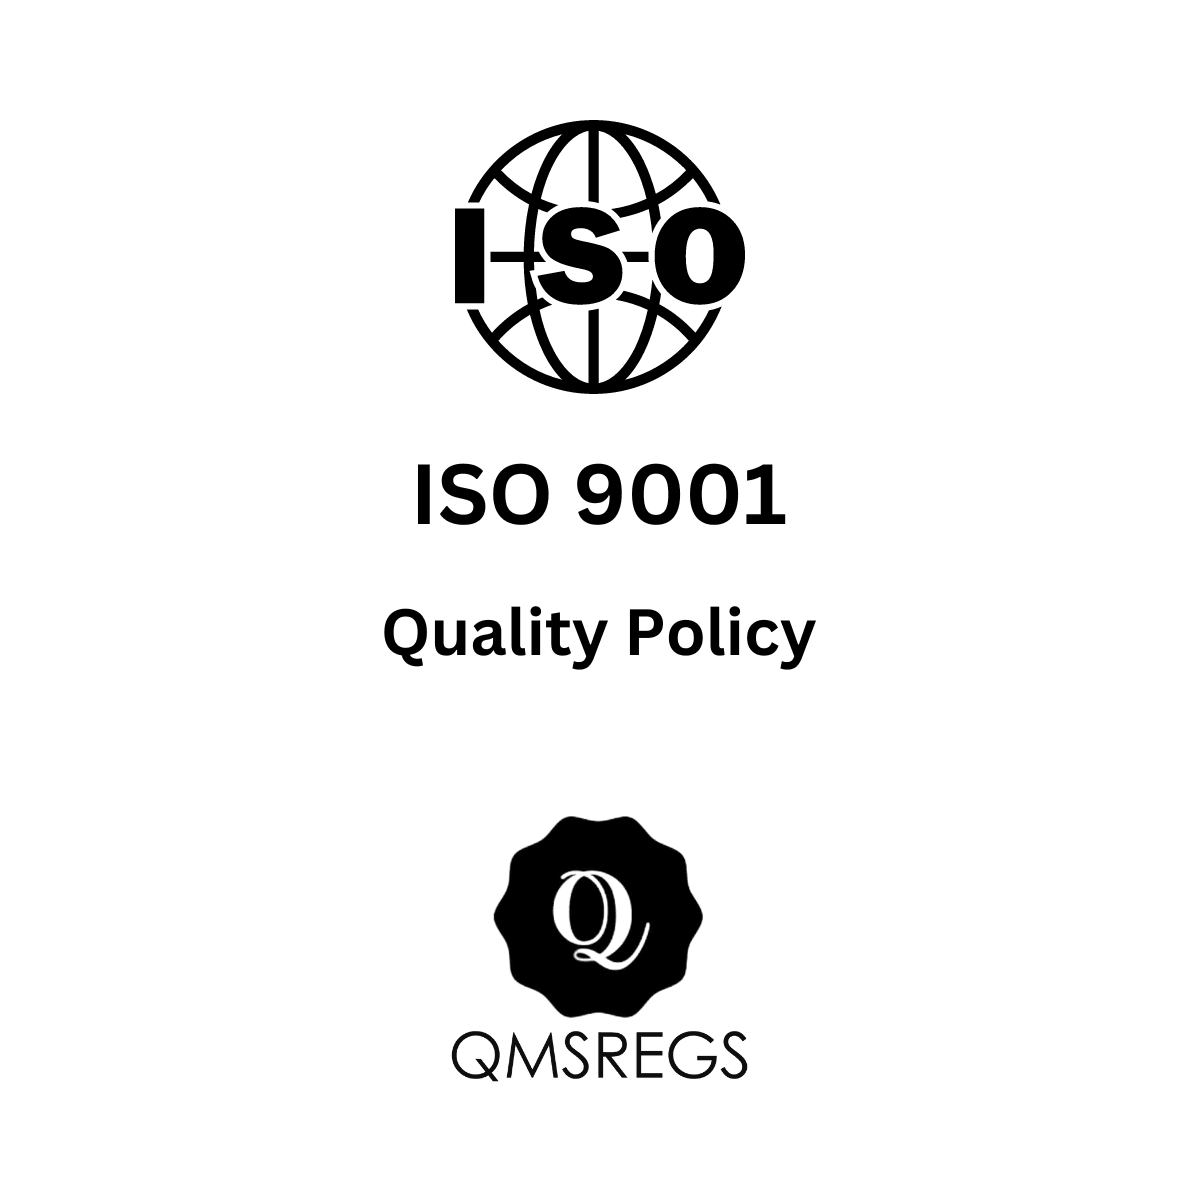 ISO 9001 Quality Policy template